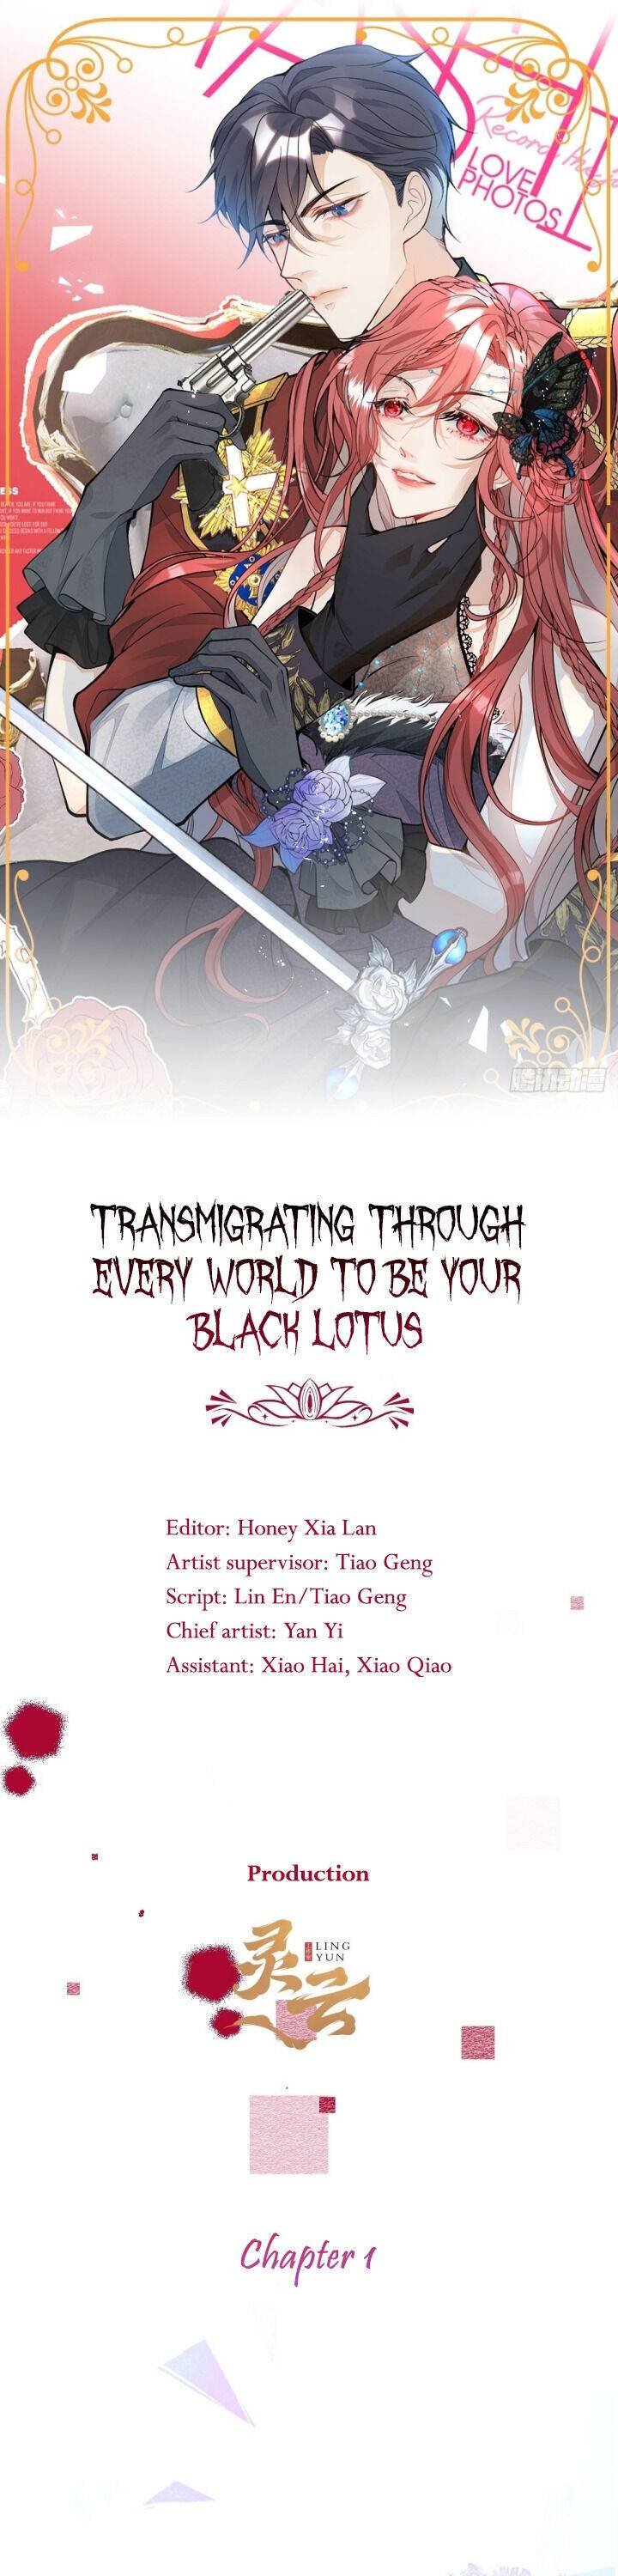 Transmigrating Through Every World to Be Your Black Lotus Chapter 1 - Page 0